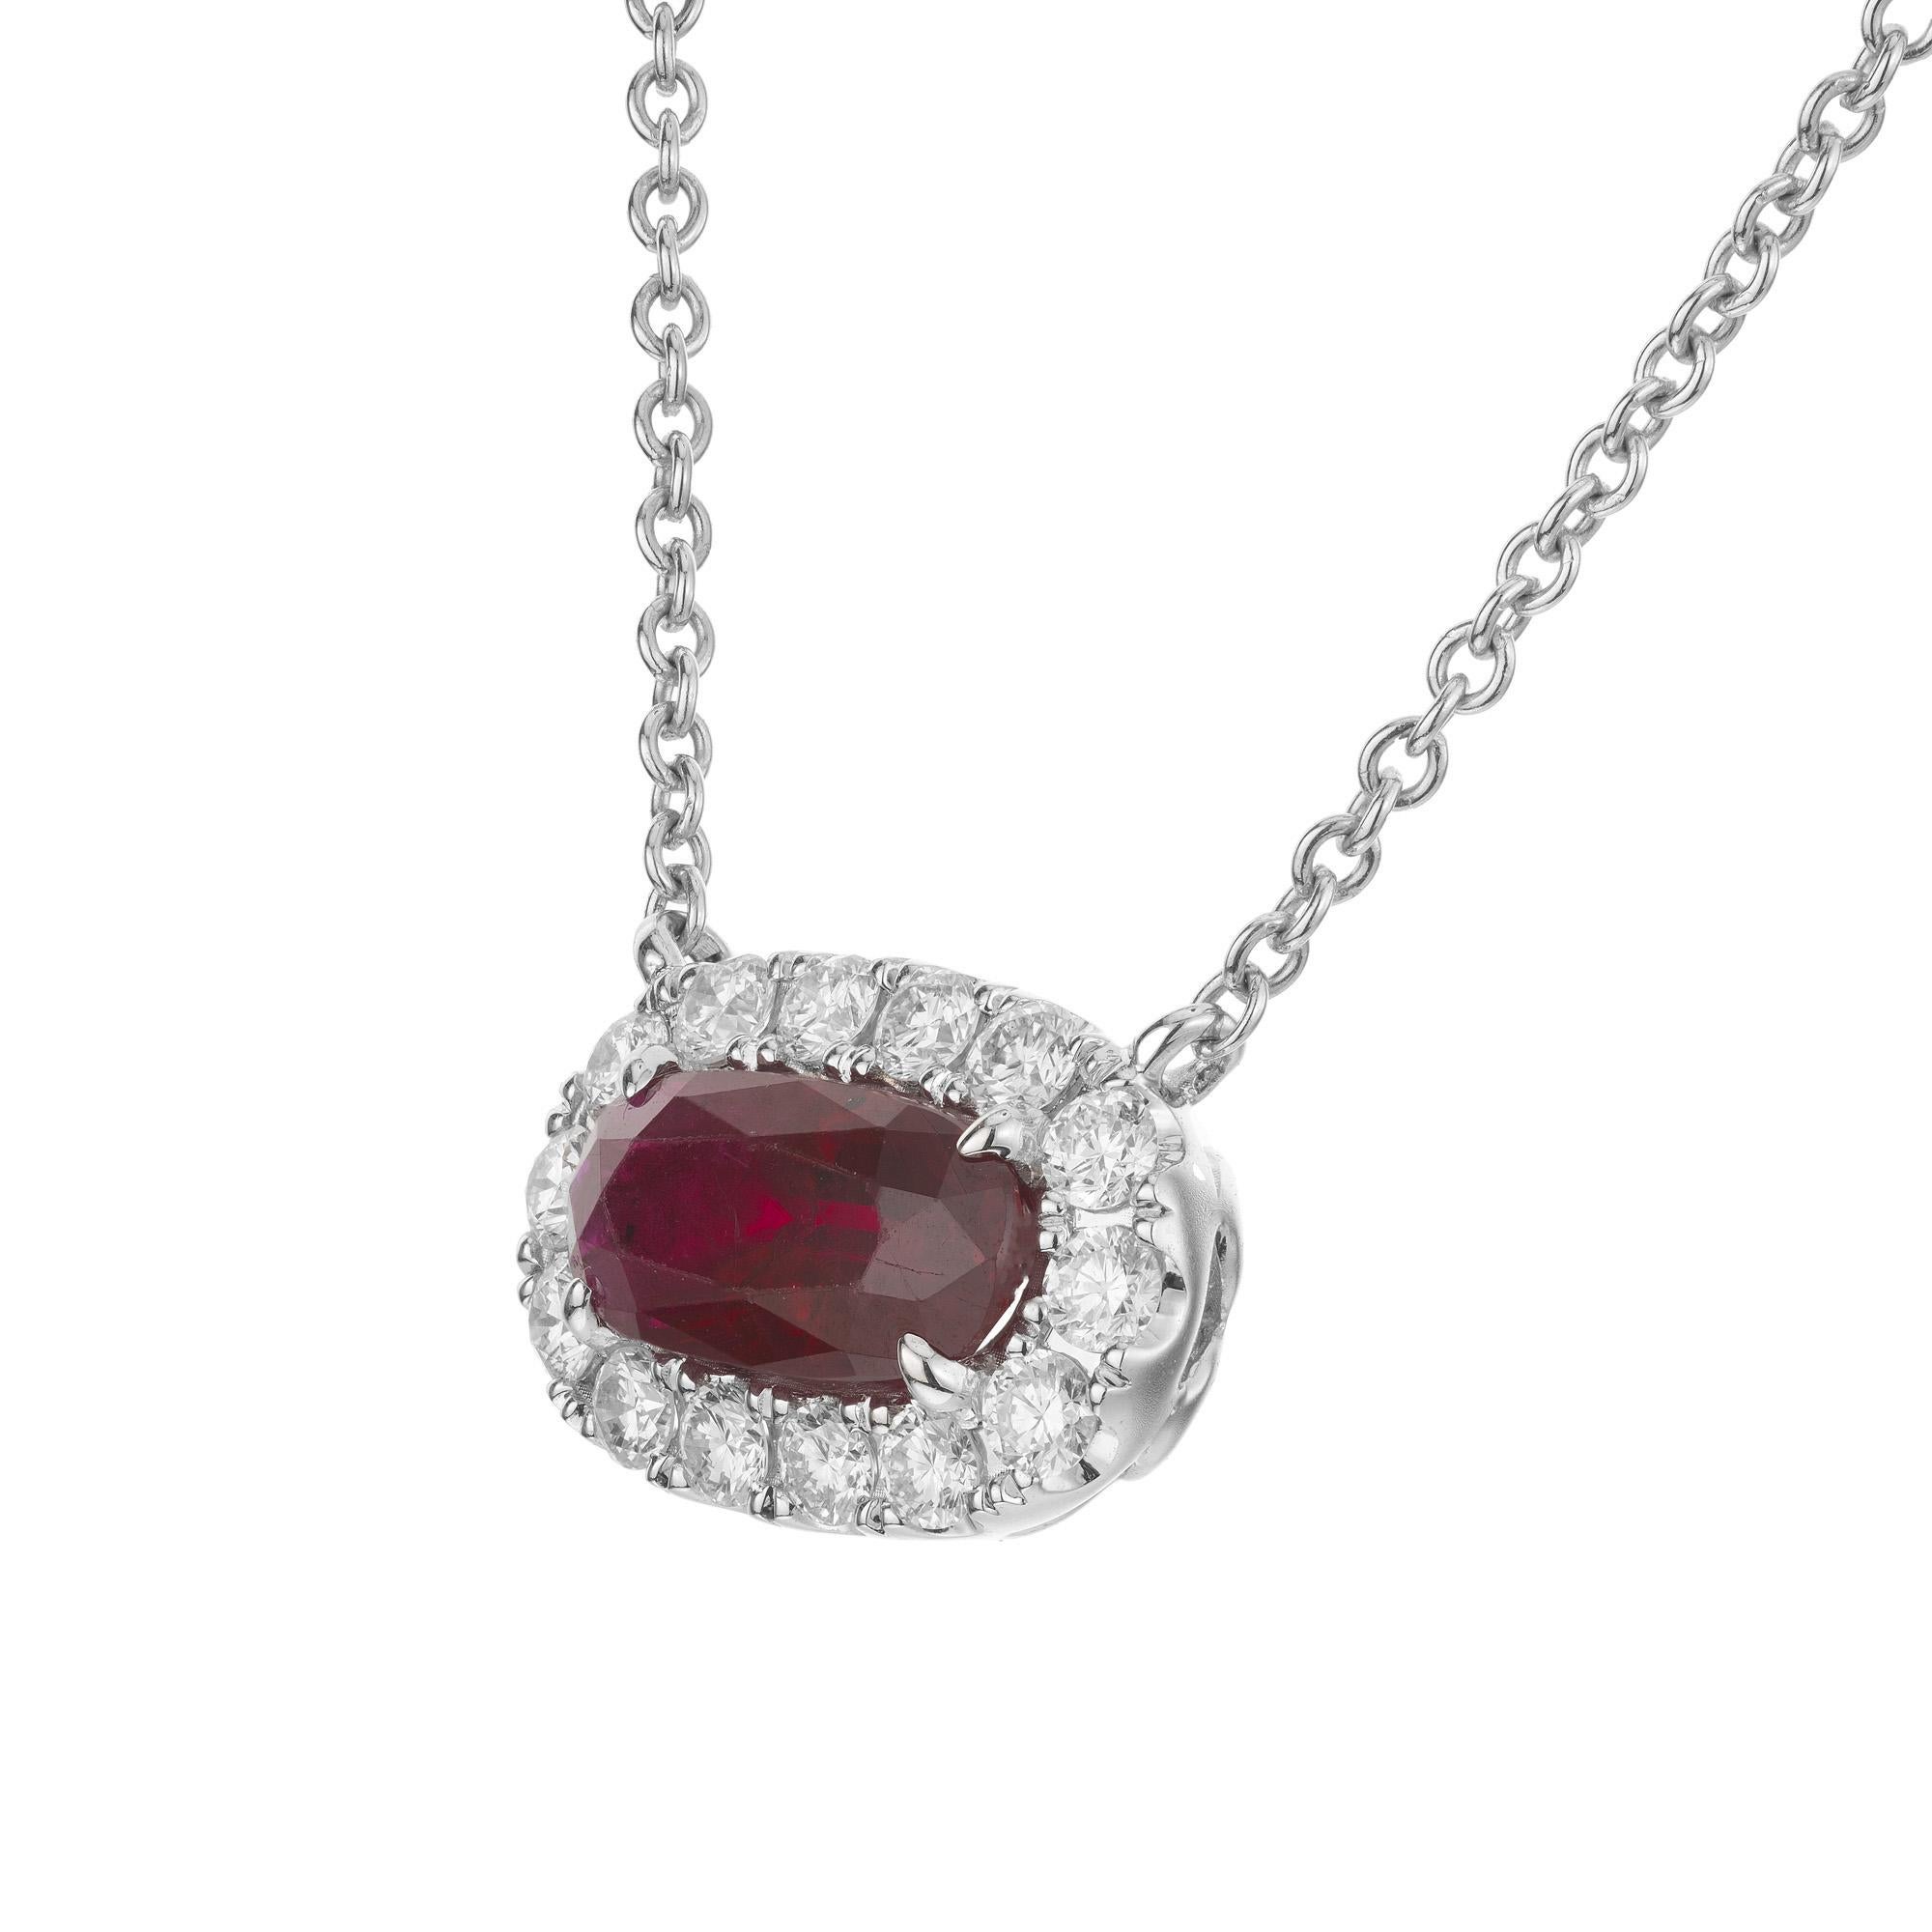 Oval Cut Peter Suchy GIA Certified 1.35 Carat Ruby Diamond Pendant Necklace For Sale